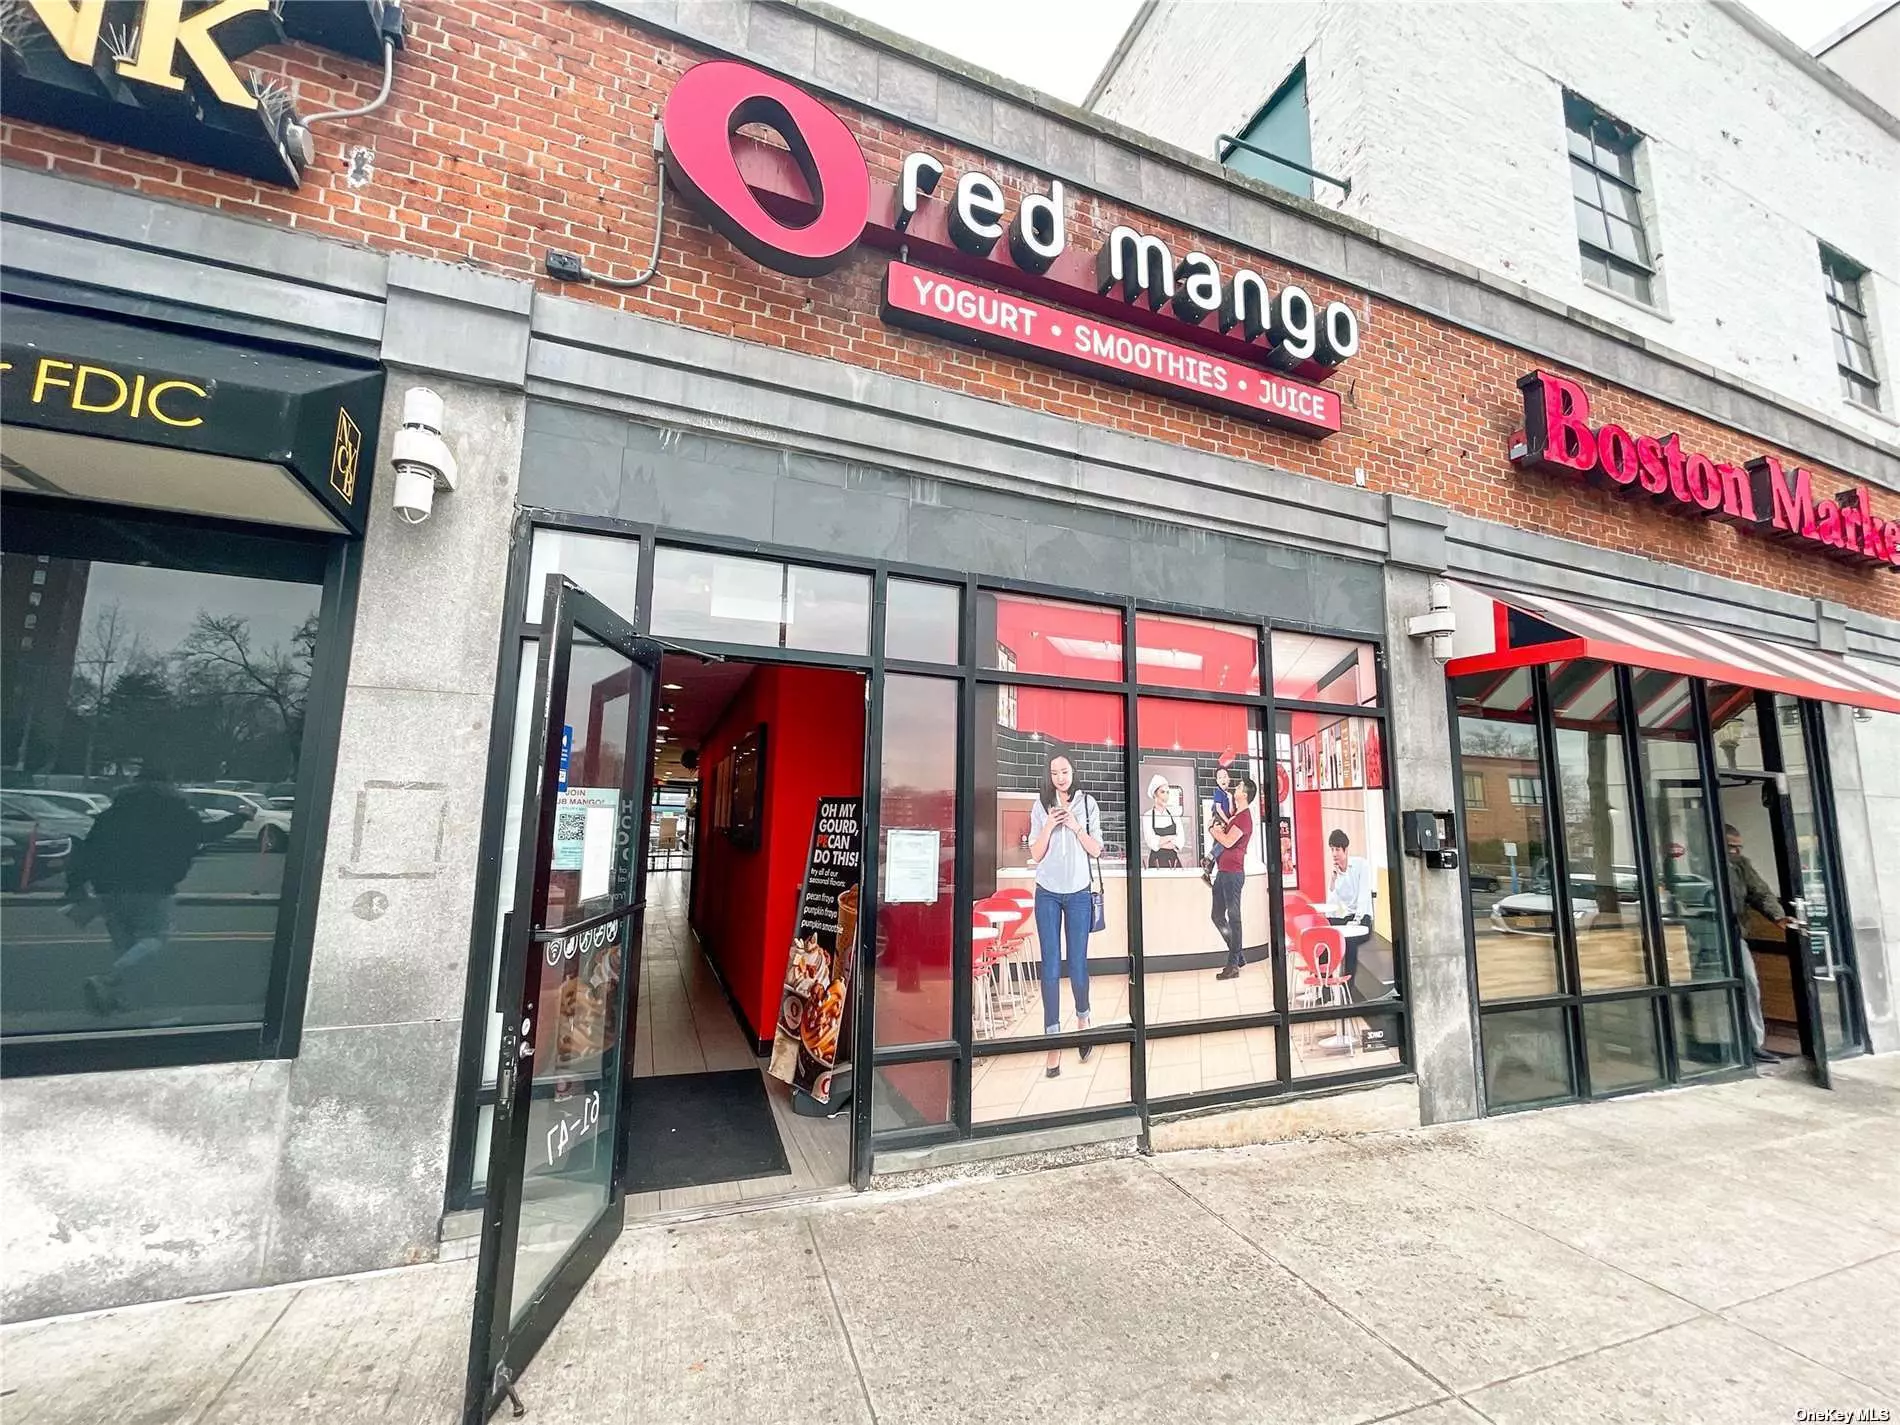 SWEETEST DESSERT SPOT DEAL $99, 000! Welcome to the sweetest business opportunity in Queens, NYC! If you&rsquo;re looking for a profitable and established franchise, then Red Mango Fresh Meadows is the perfect most ideal location and business with a thriving Red Mango Yogurt & Smoothies store in one of the most sought-after and vibrant neighborhoods of Fresh Meadows! With over 200 locations nationwide, Red Mango is a very popular franchise that offers an array of frozen yogurt flavors, smoothies, coffee, and all types of healthy options. This profitable Red Mango Franchise location has been established since 2008, with over 15 years in business. Located in the bustling Fresh Meadows Shopping Plaza on 188th St, this business offers a prime storefront location with excellent visibility and high foot traffic. Fresh Meadows Shopping Plaza features a massive parking lot and is anchored by nearby giants including Starbucks, Boston Market, Qdoba, FiveGuys, AppleBee&rsquo;s Grill + Bar, AT&T, CVS, KOHLS, HOOTERS, AMC, USPS Post Office and many more! Inside the store front is trendy and renovated with great aesthetics, while also providing ample square footage space for comfortable seating and an inviting atmosphere for customers to enjoy. The store has been well managed and consistent in generating revenue, grossing over $750K+ in sales for 2022 (a jump from $657K sales in 2021). Sale will include favorable lease renewal terms, all equipment owned (including 4 Taylor Water Cooled yogurt machines, commercial fridges, POS system and other equipment), and hands-on training for a smooth transition to new owners! Red Mango is a simple-to-run franchise concept with franchise royalties of only 6% of sales, and the marketing fee is just 3% of sales. You&rsquo;ll also get the benefit of a major brand with all their ad spend, promotions, and marketing initiatives done for you to drive continuous business growth! The business owner has spent and invested over $300K+ for build out, franchise fees, and equipment for this storefront. This sale isn&rsquo;t just about the well-established franchise business - it&rsquo;s also about location and community! Fresh Meadows is a vibrant, diverse community that celebrates local businesses and values quality products and services. This Red Mango yogurt store in this neighborhood is a beloved gathering place for families, students from elementary, middle school, Franchise Lewis High School, St. Francis Prep, ST Johns U, and professionals alike. Plus, with a growing demand for healthy, delicious options, the industry has seen steady growth. An opportunity like this does not come often, and to get a store that is already established with a loyal customer base and ideal location is a rarity. If you&rsquo;re an entrepreneur looking to take advantage of a proven business model, a supportive franchisor, and a prime location, then don&rsquo;t miss out on this sweet opportunity!!